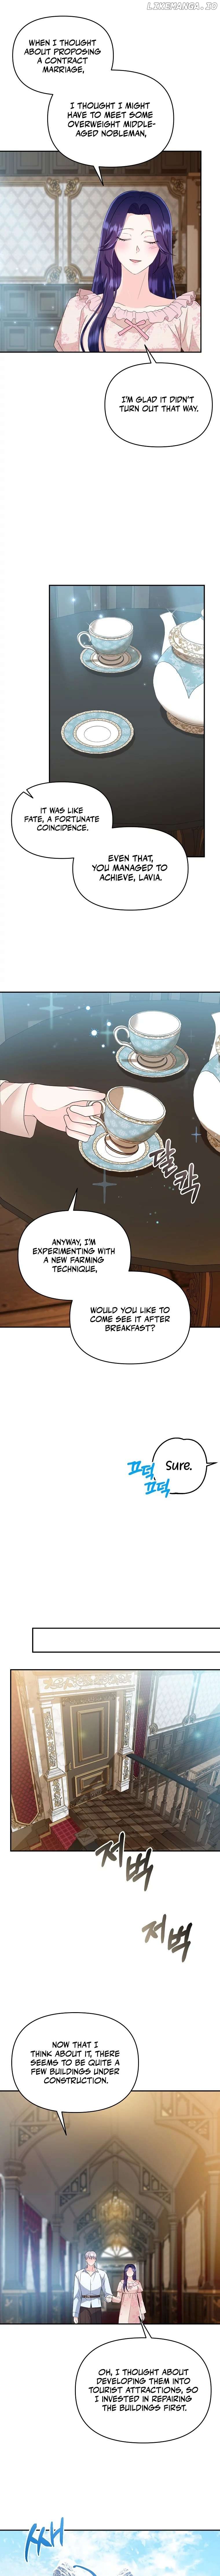 The contract marriage has come to an end Chapter 4 - page 7